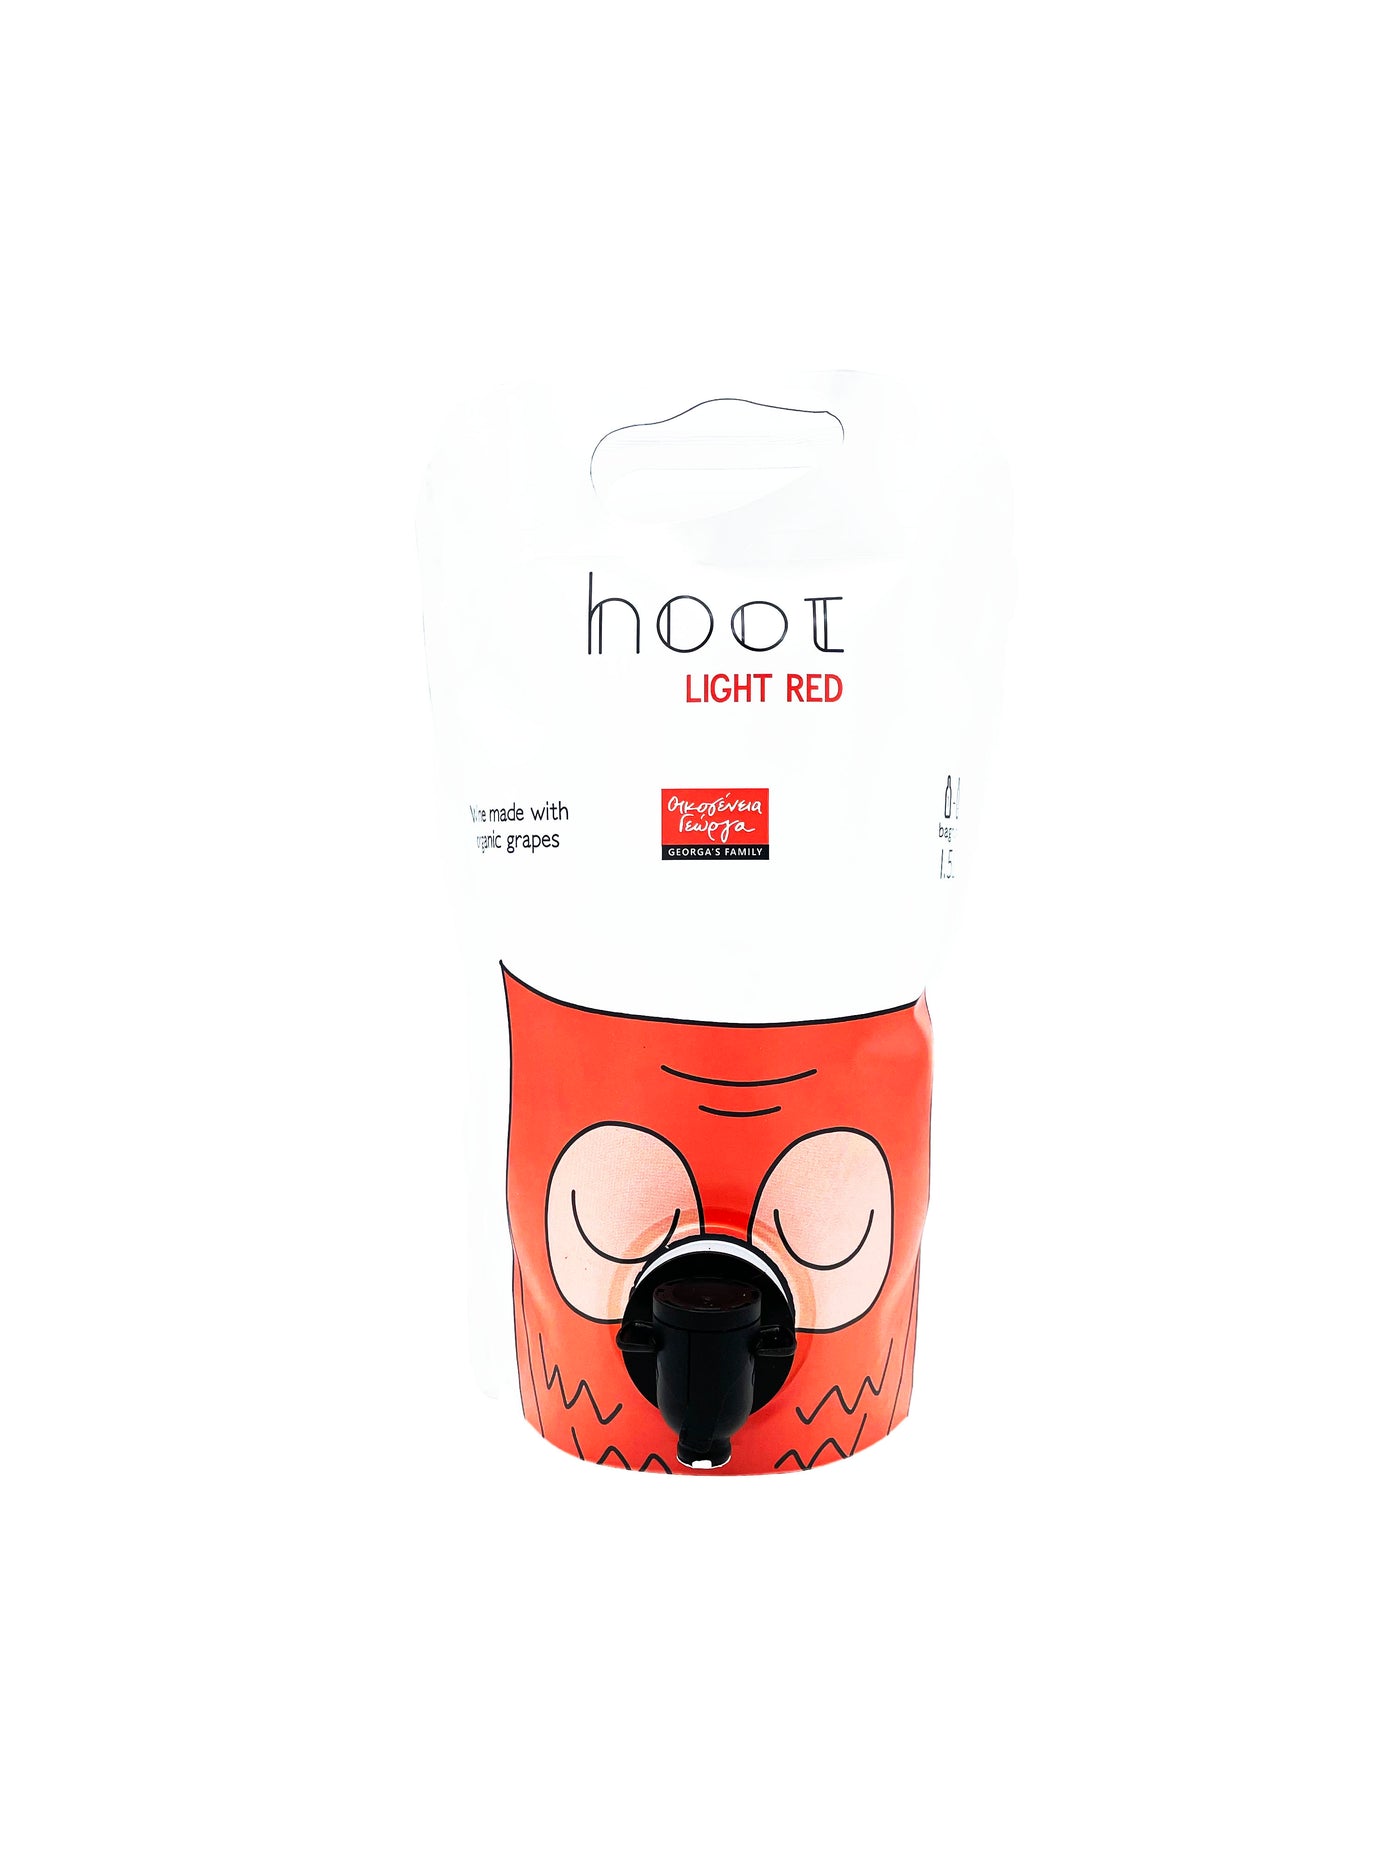 Georgas Family Hoot Light Red Pouch 1.5L